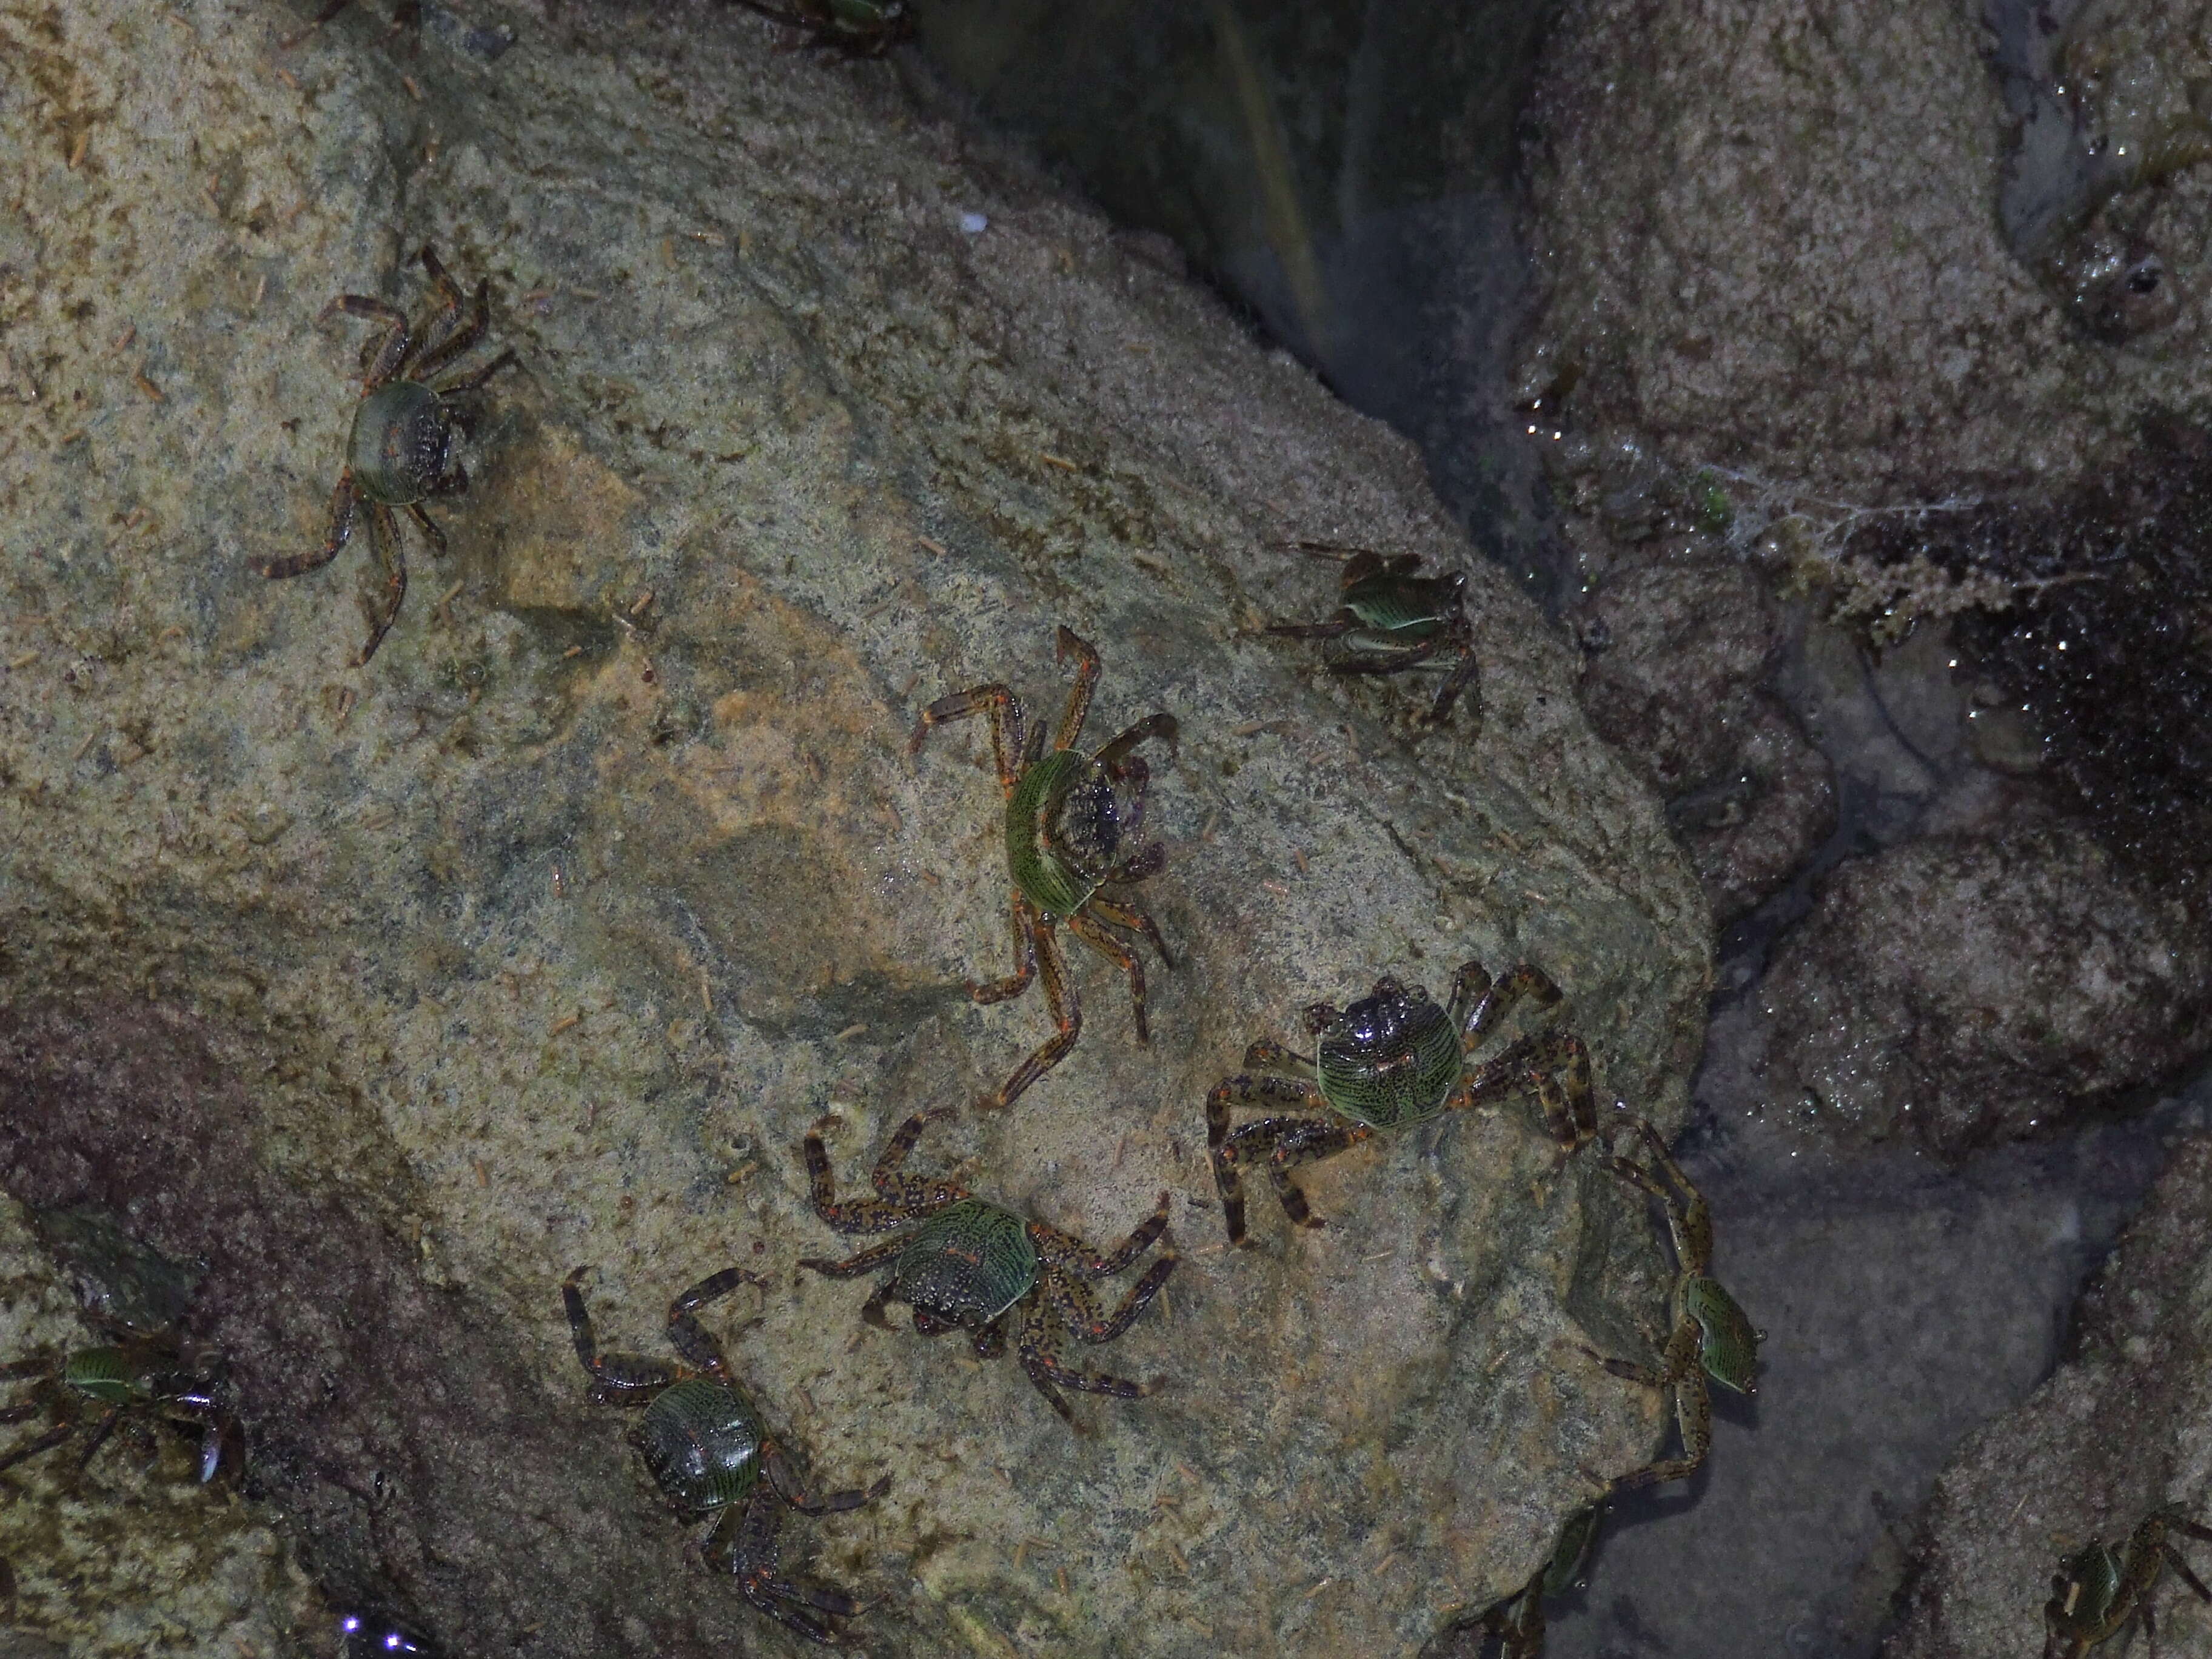 Image of marsh crabs, shore crabs, and talon crabs